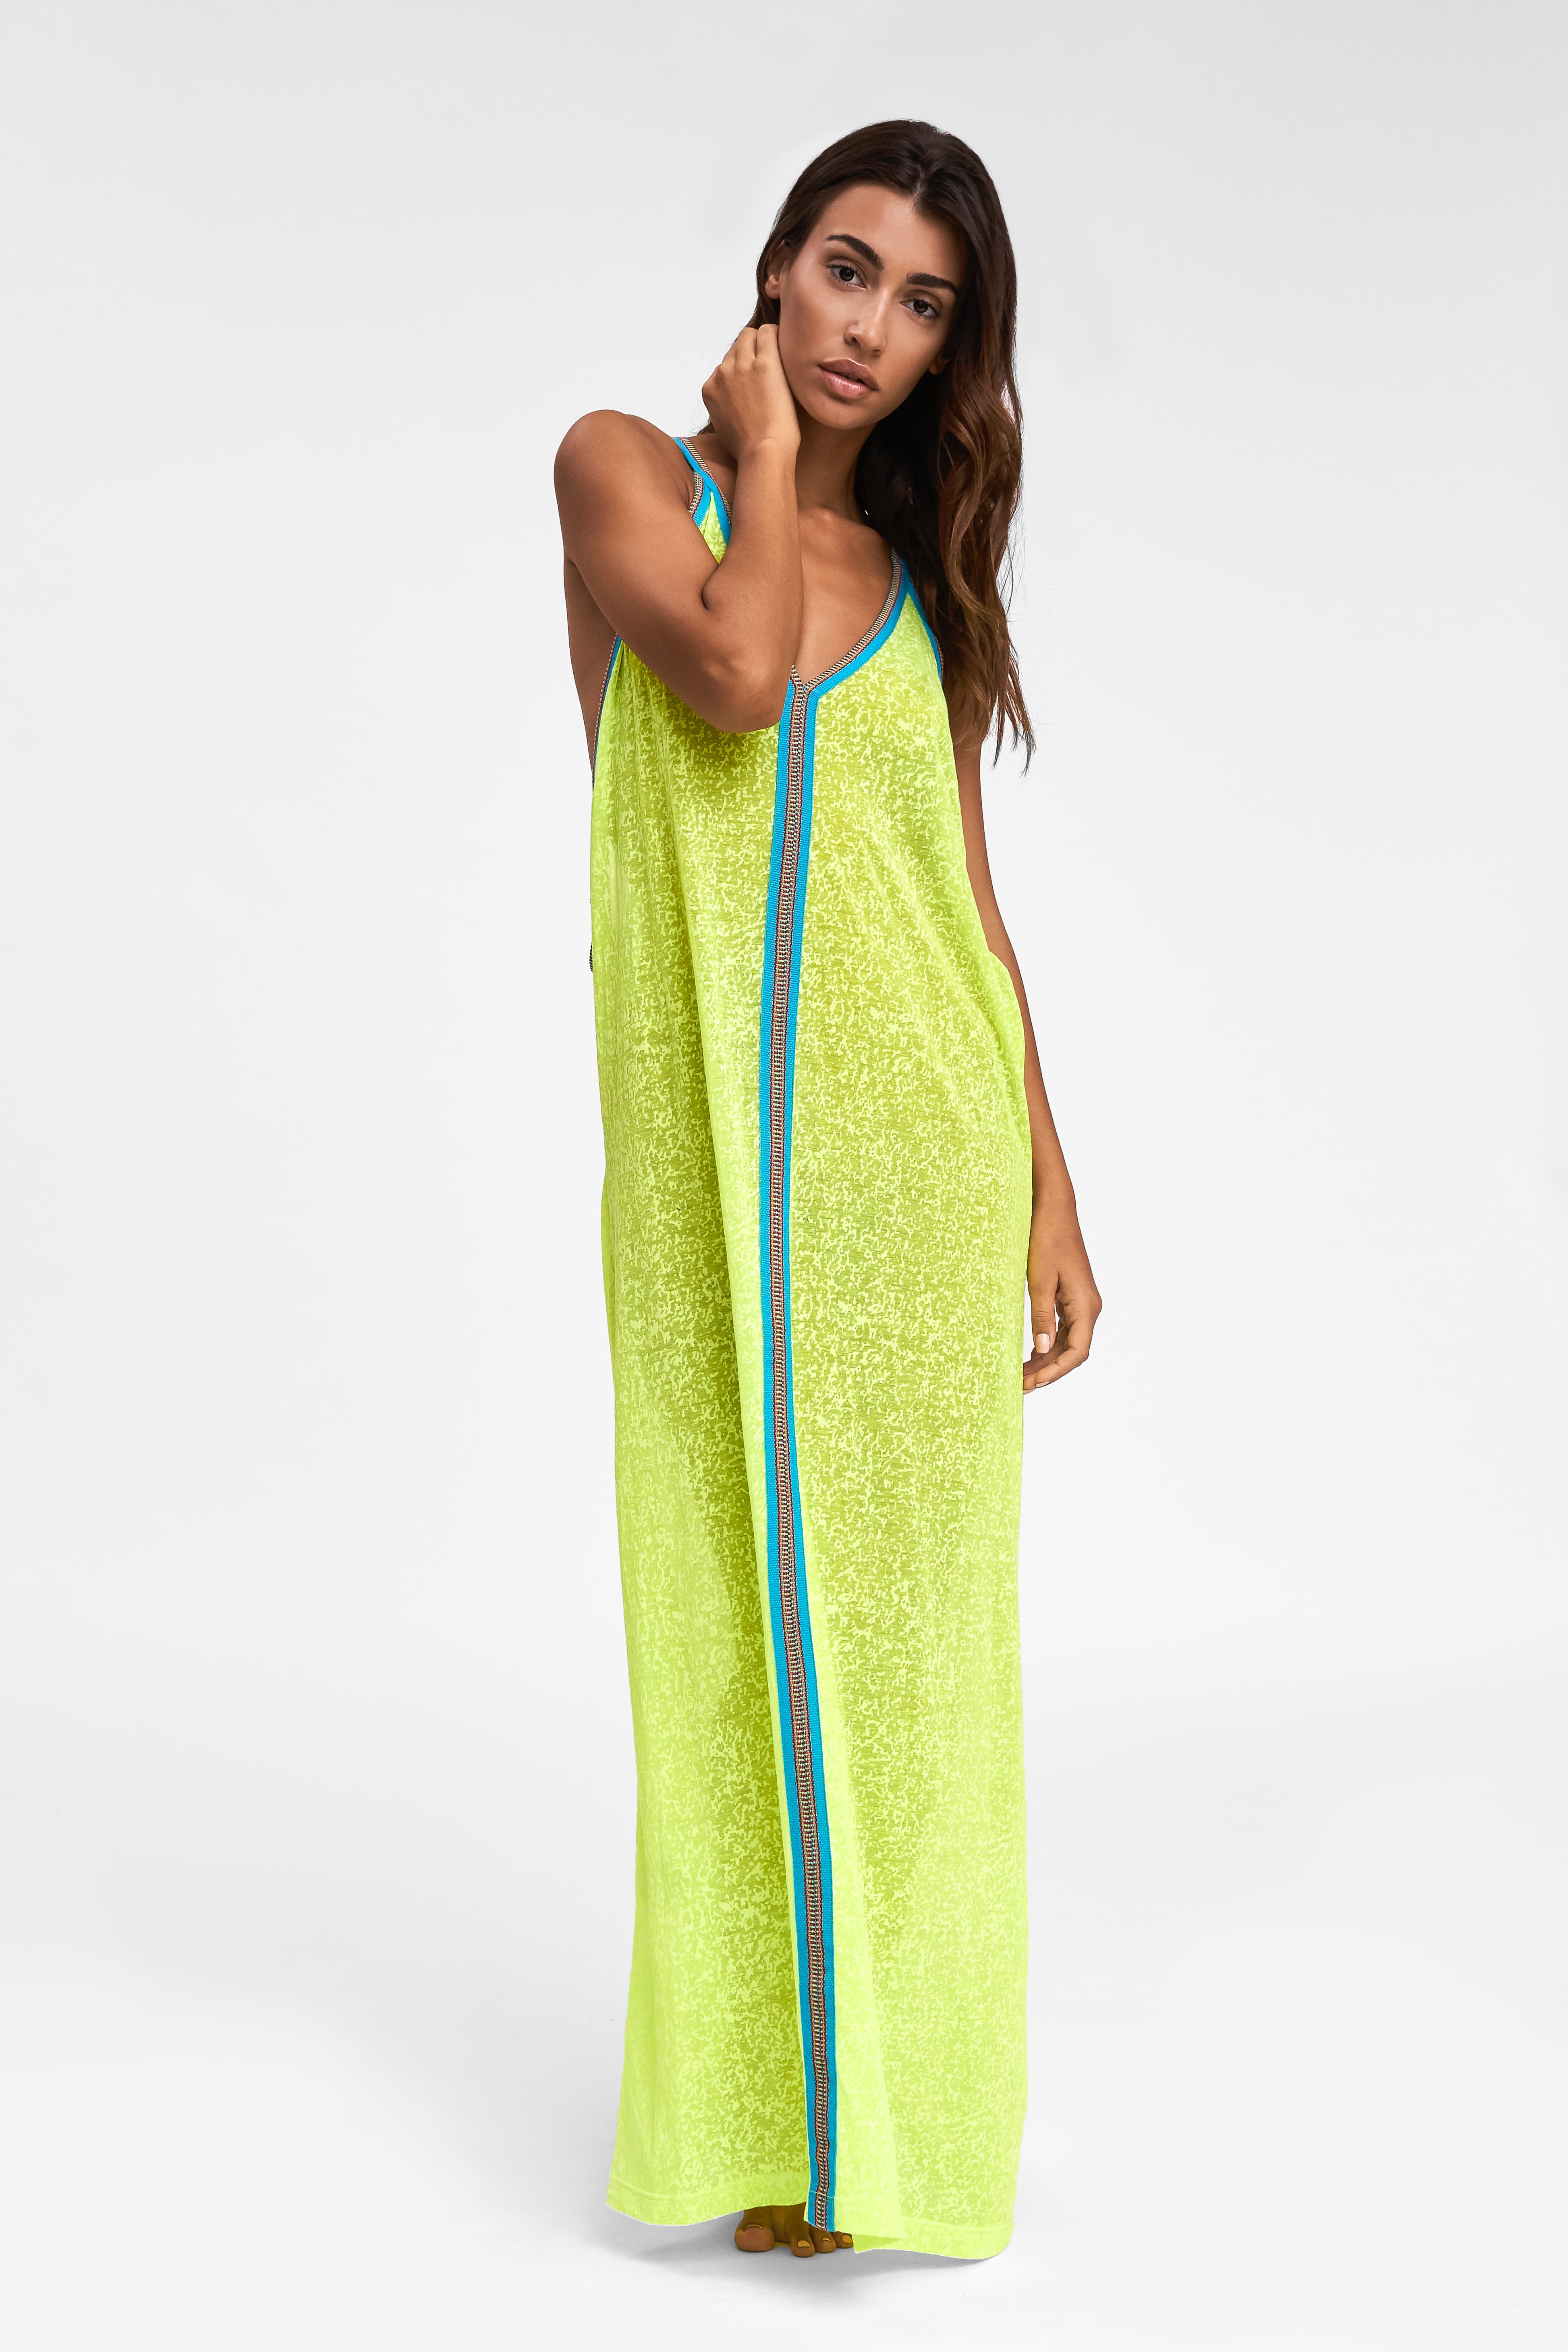 Pitusa Sundress in Neon Yellow with bright blue trim